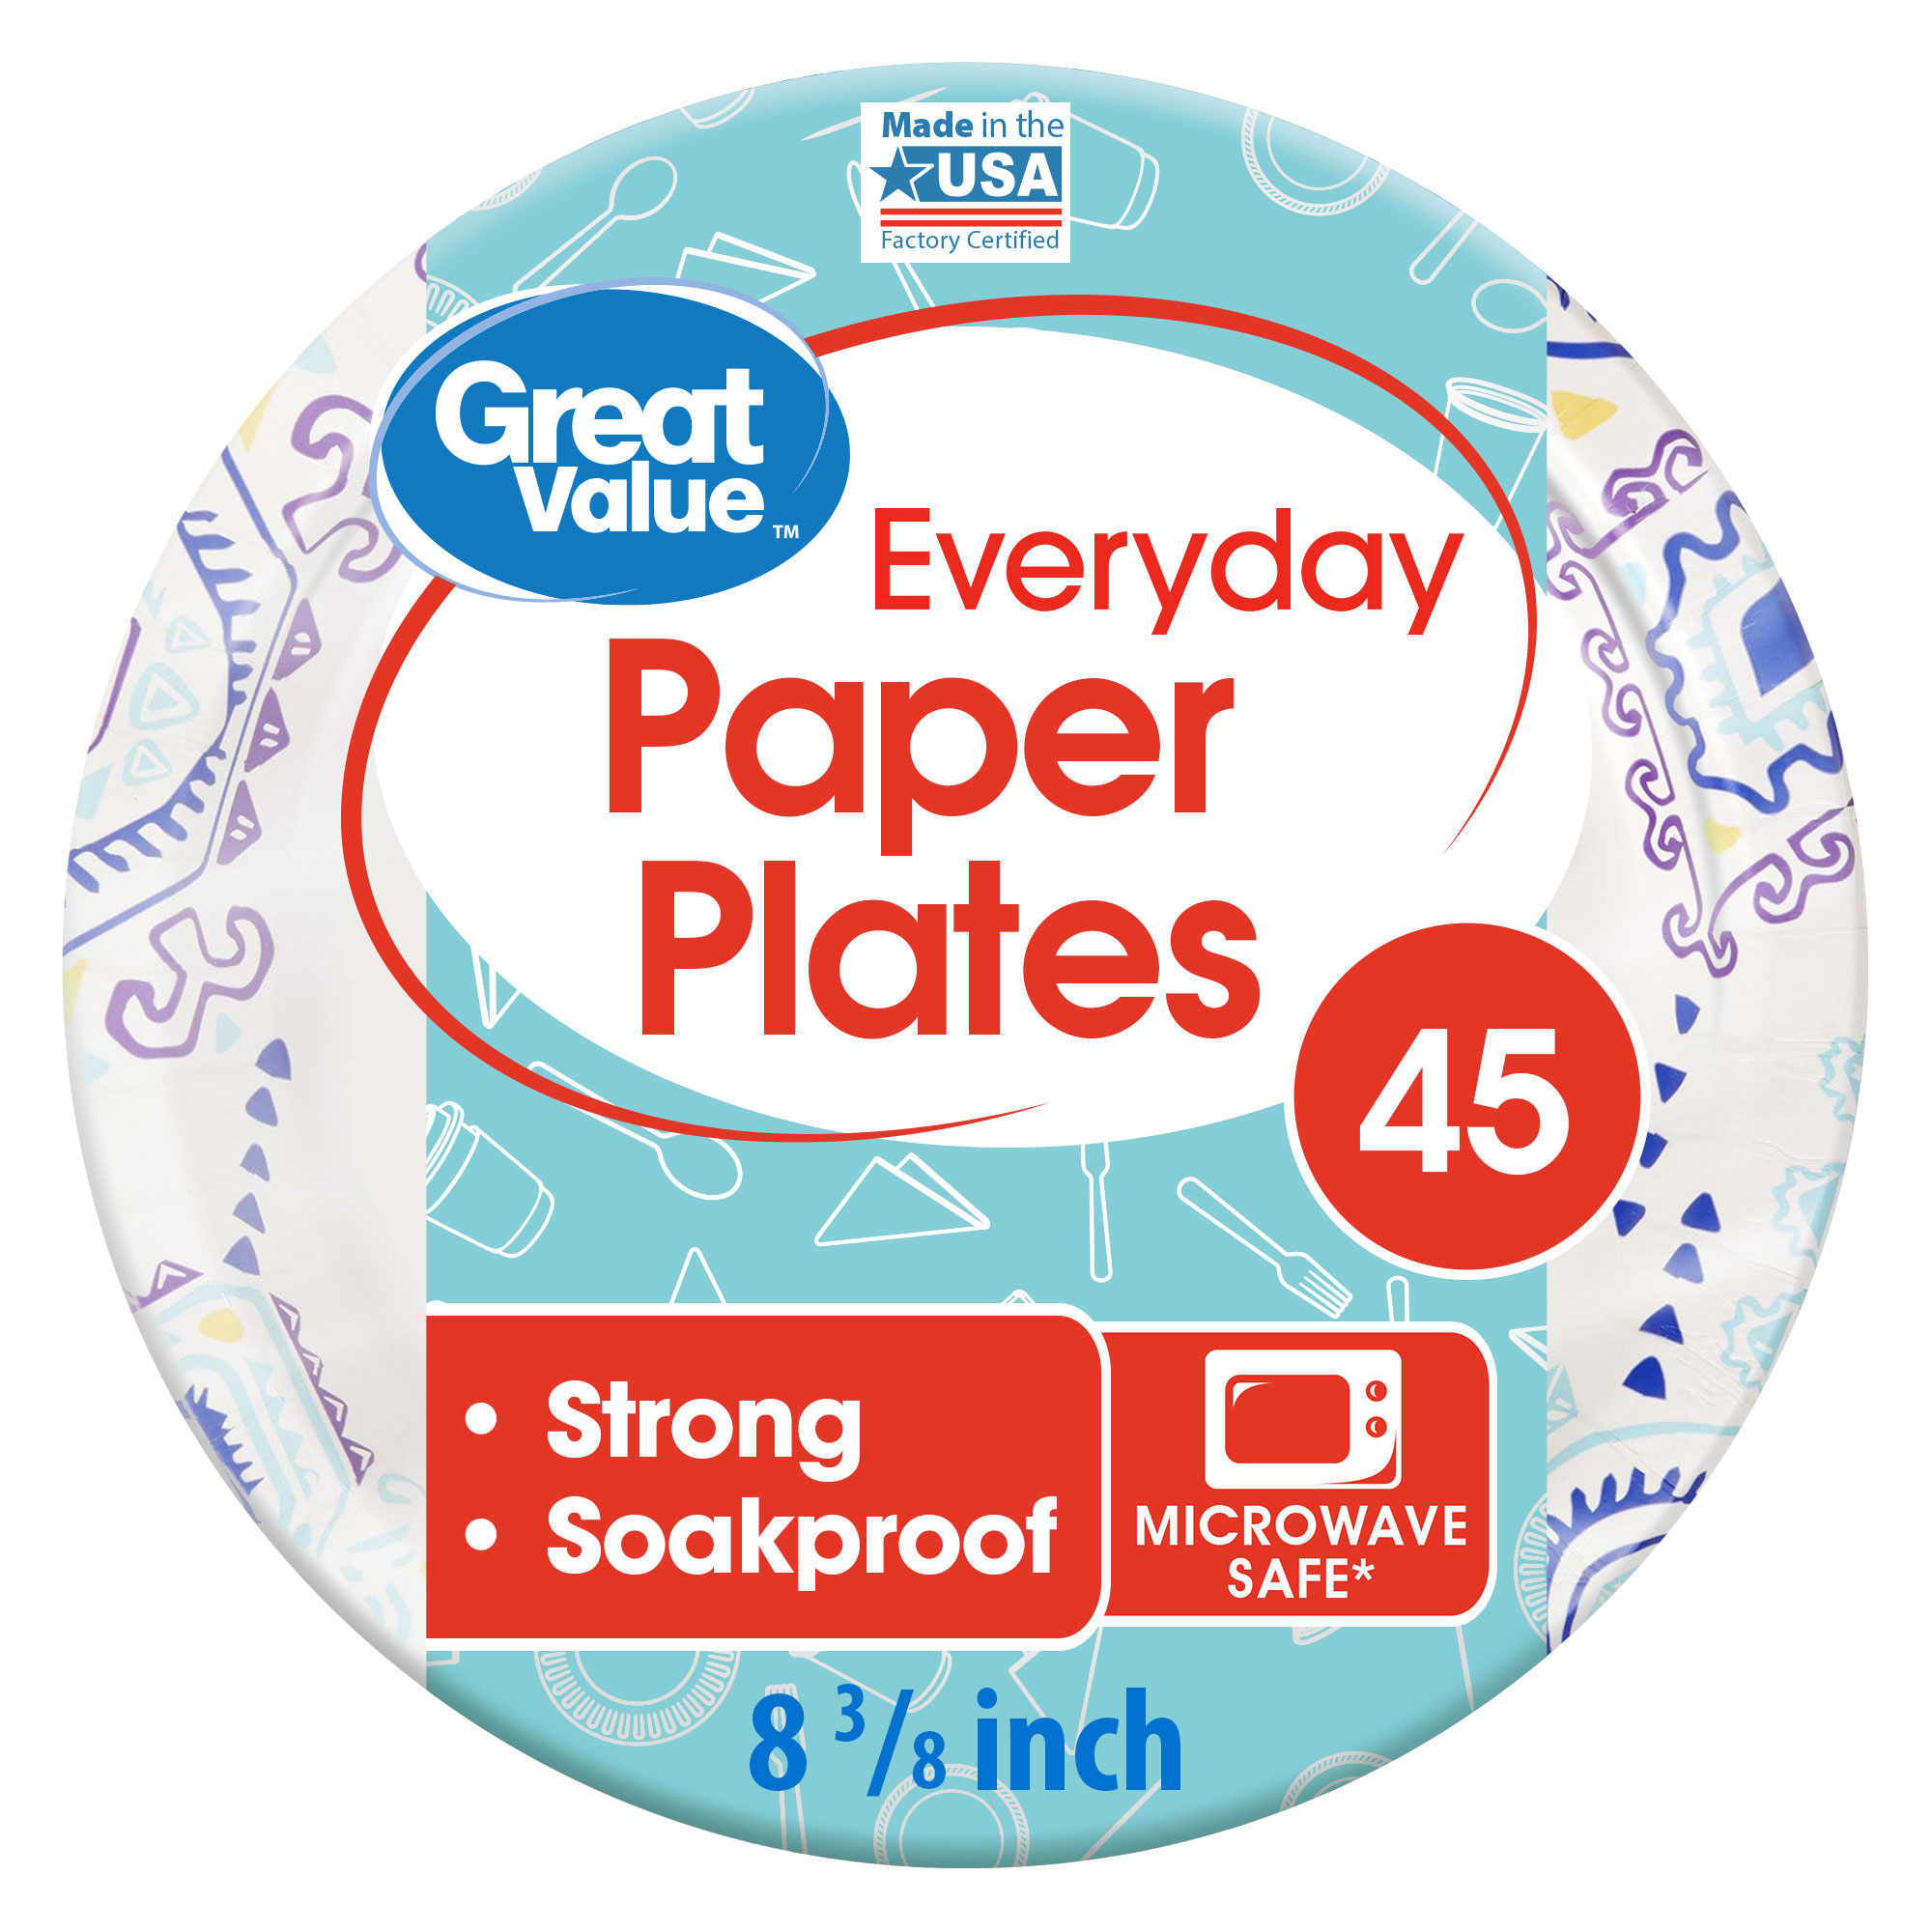 Great Value Everyday Paper Plates, 8 1/2", 45 Count - image 1 of 8